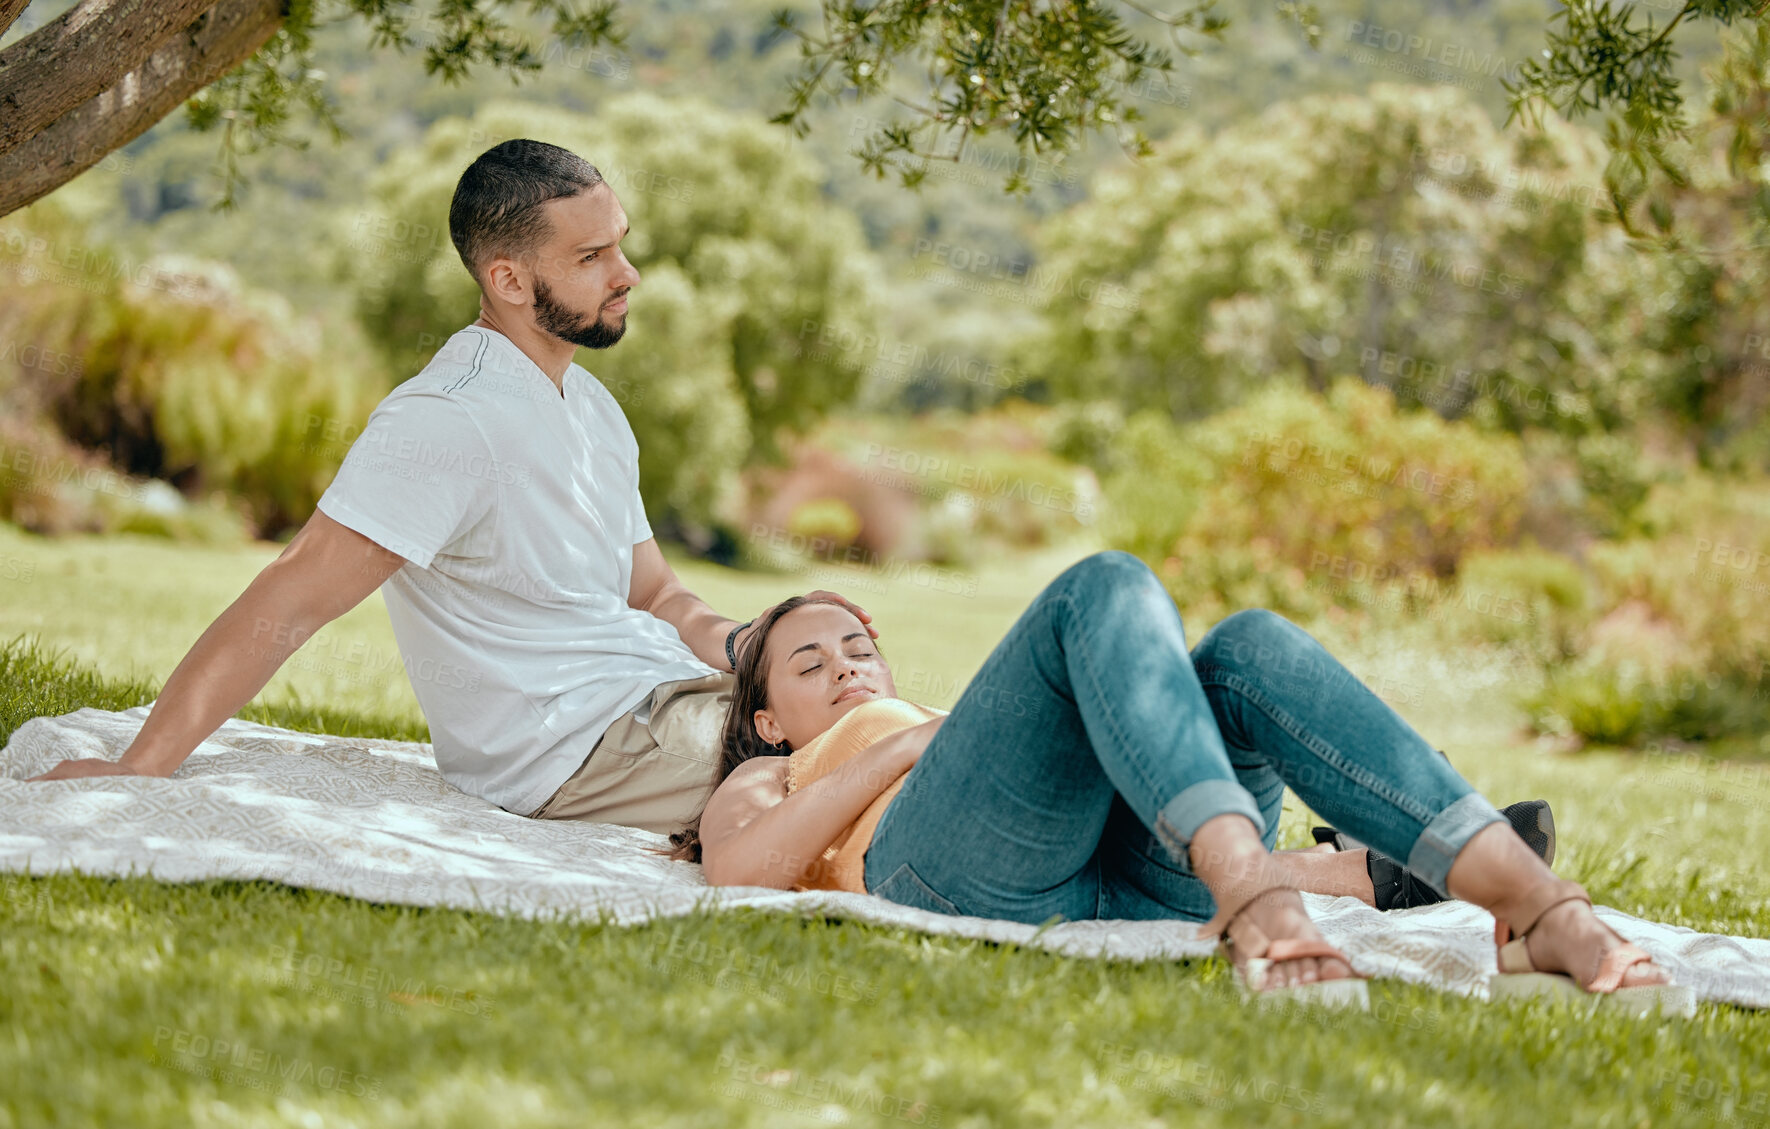 Buy stock photo Love, couple and relax on blanket in park, nature or 
outdoors bonding and resting. Romance, support and woman sleeping outside with man by tree, enjoying date or vacation time together in garden.